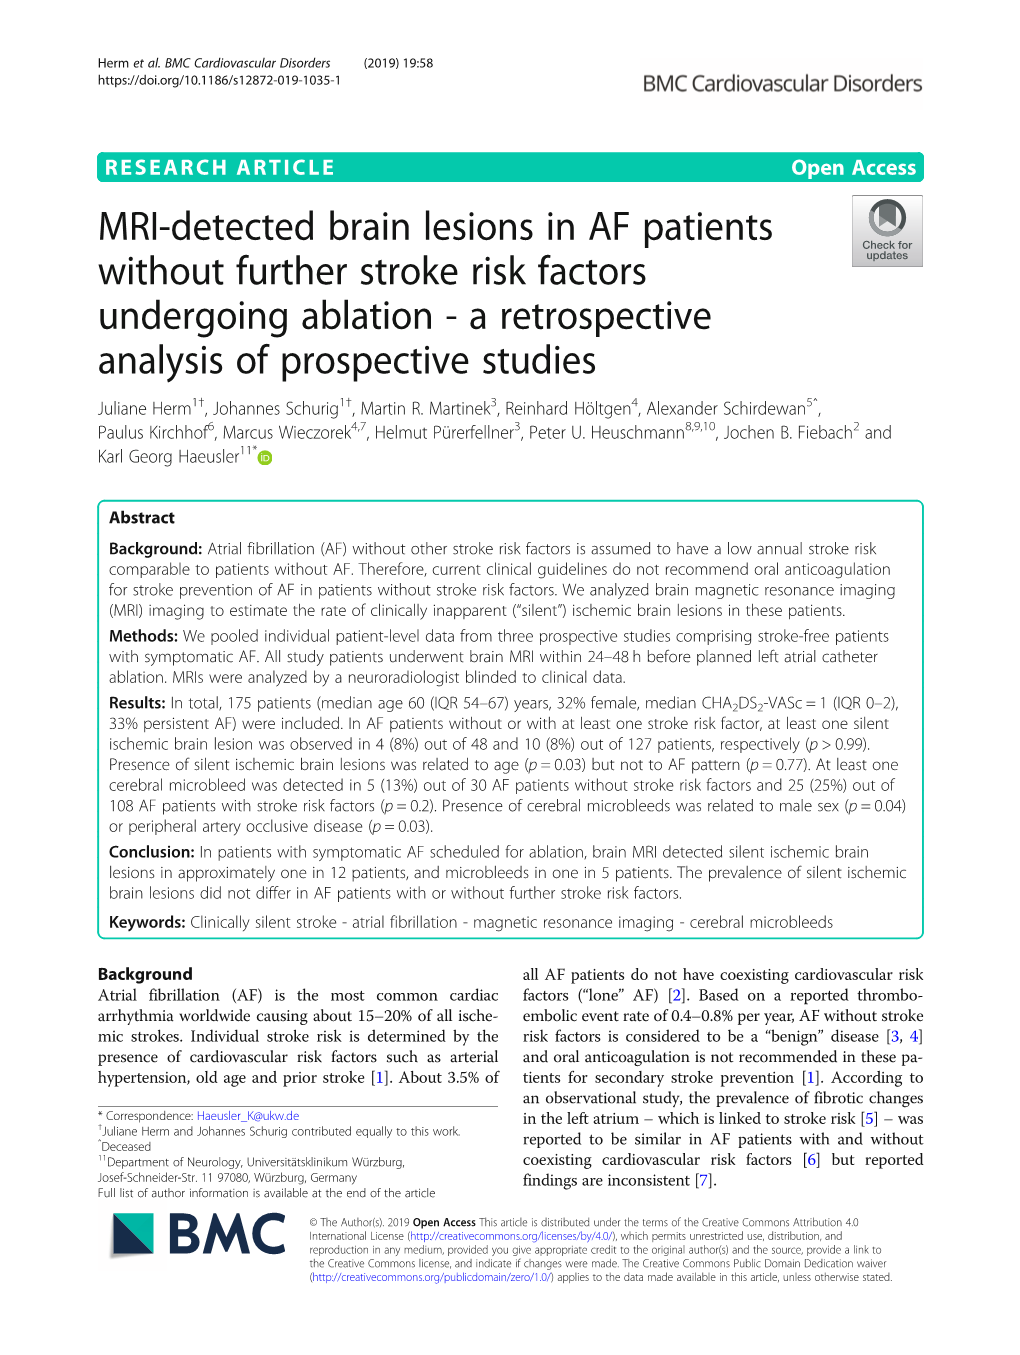 MRI-Detected Brain Lesions in AF Patients Without Further Stroke Risk